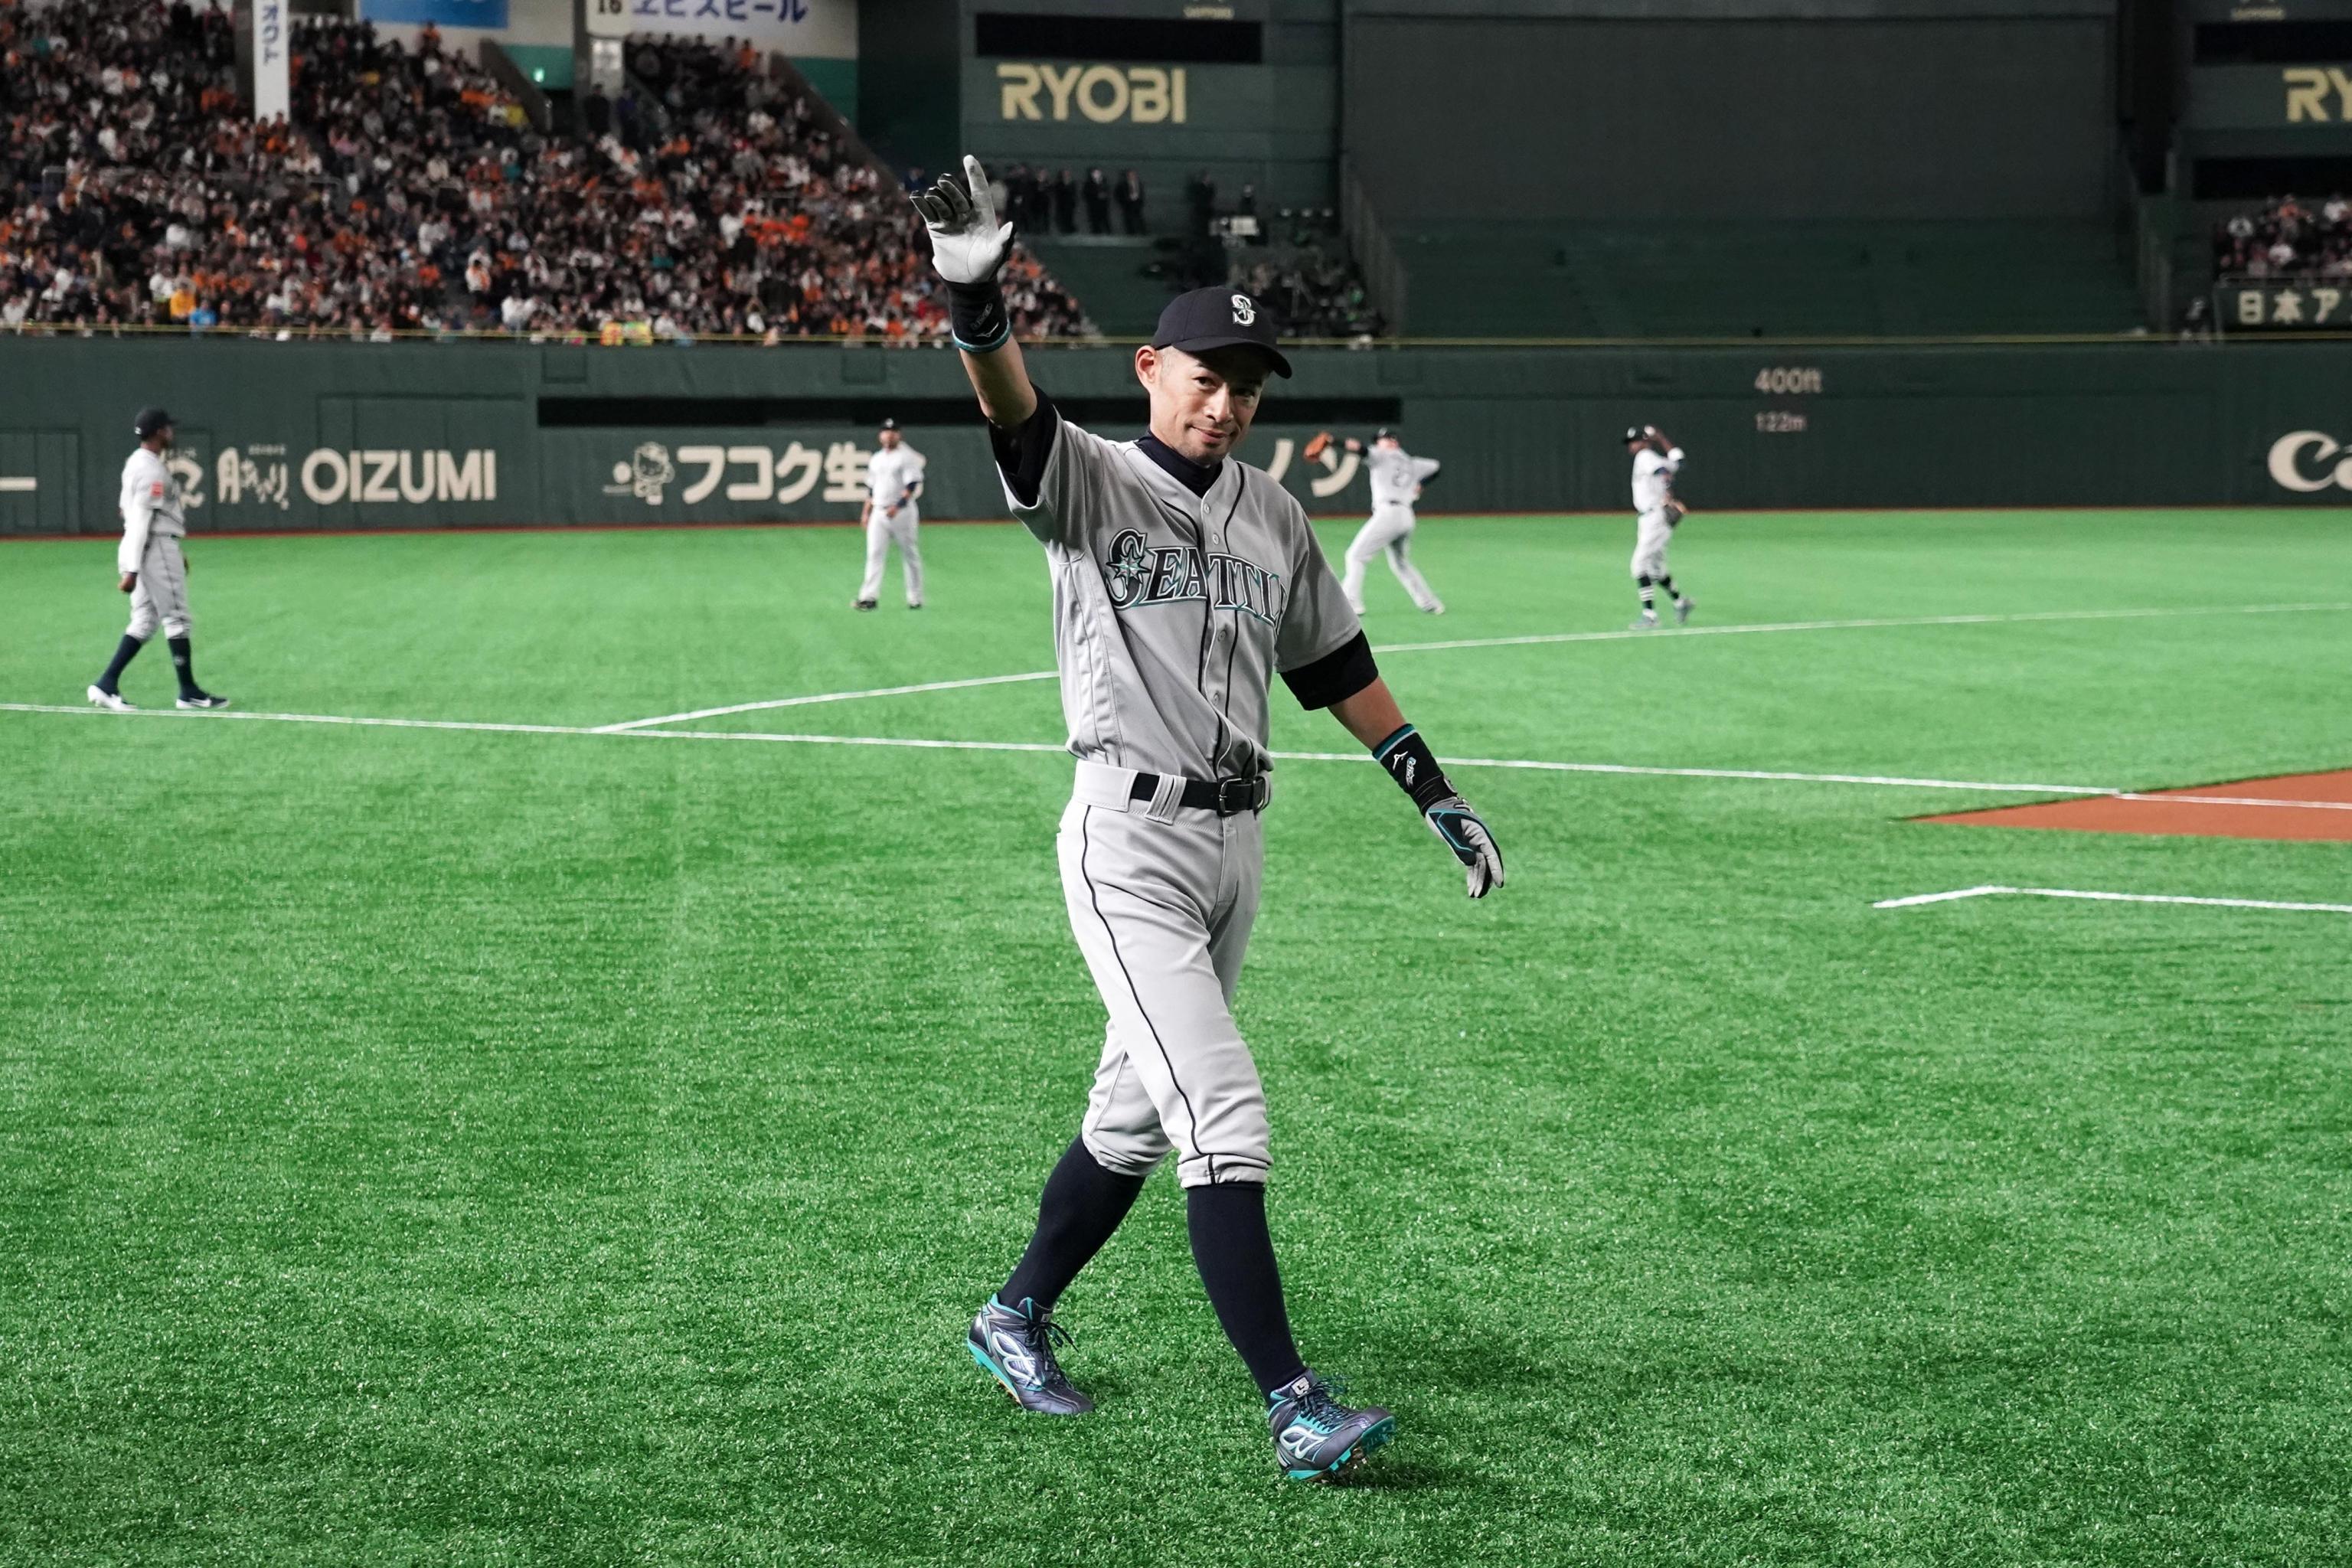 At 43, Ichiro Suzuki is still lashing out hits for the Miami